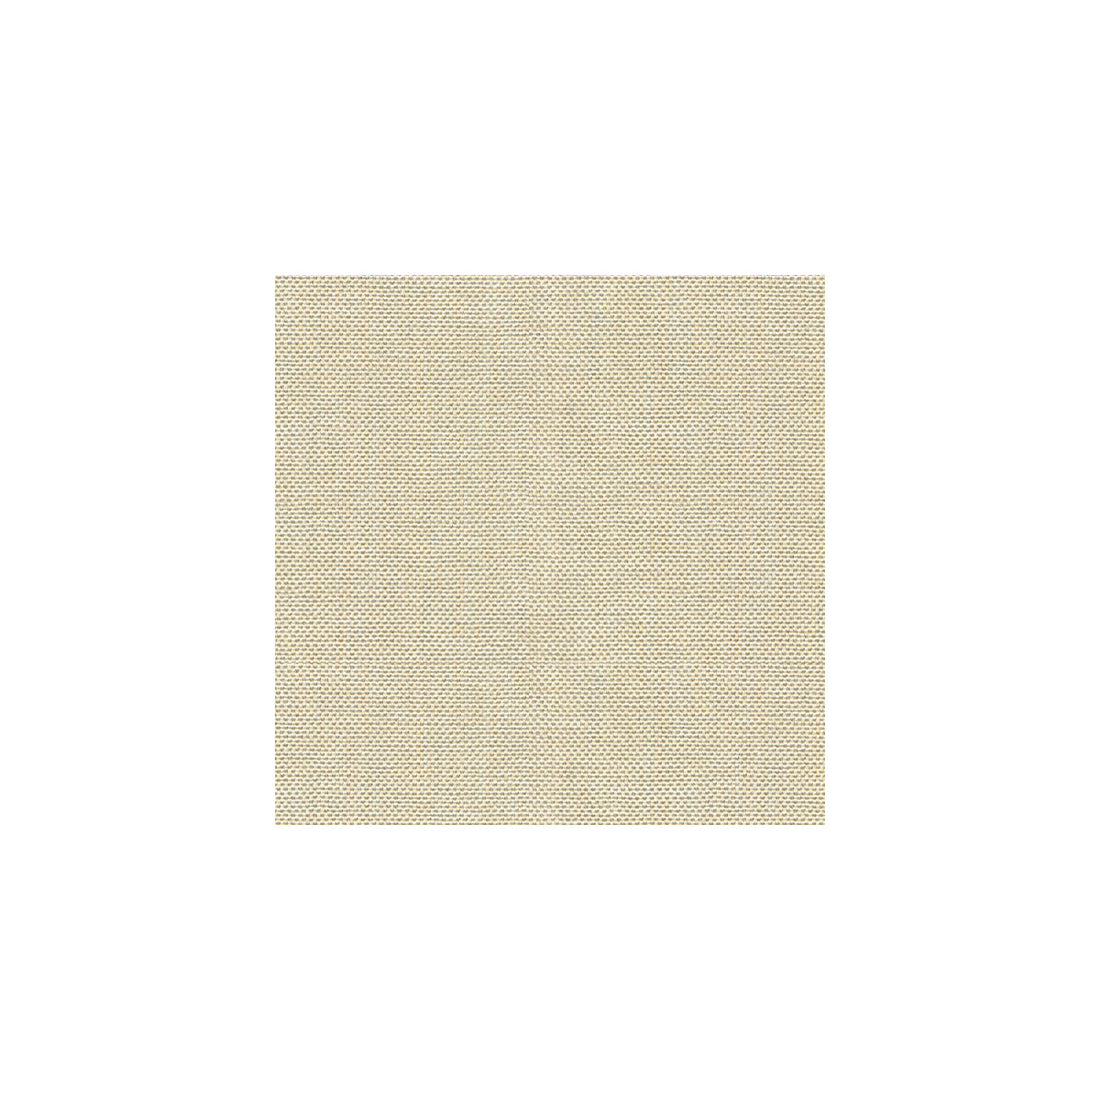 Kravet Basics fabric in 30299-1116 color - pattern 30299.1116.0 - by Kravet Basics in the Perfect Plains collection